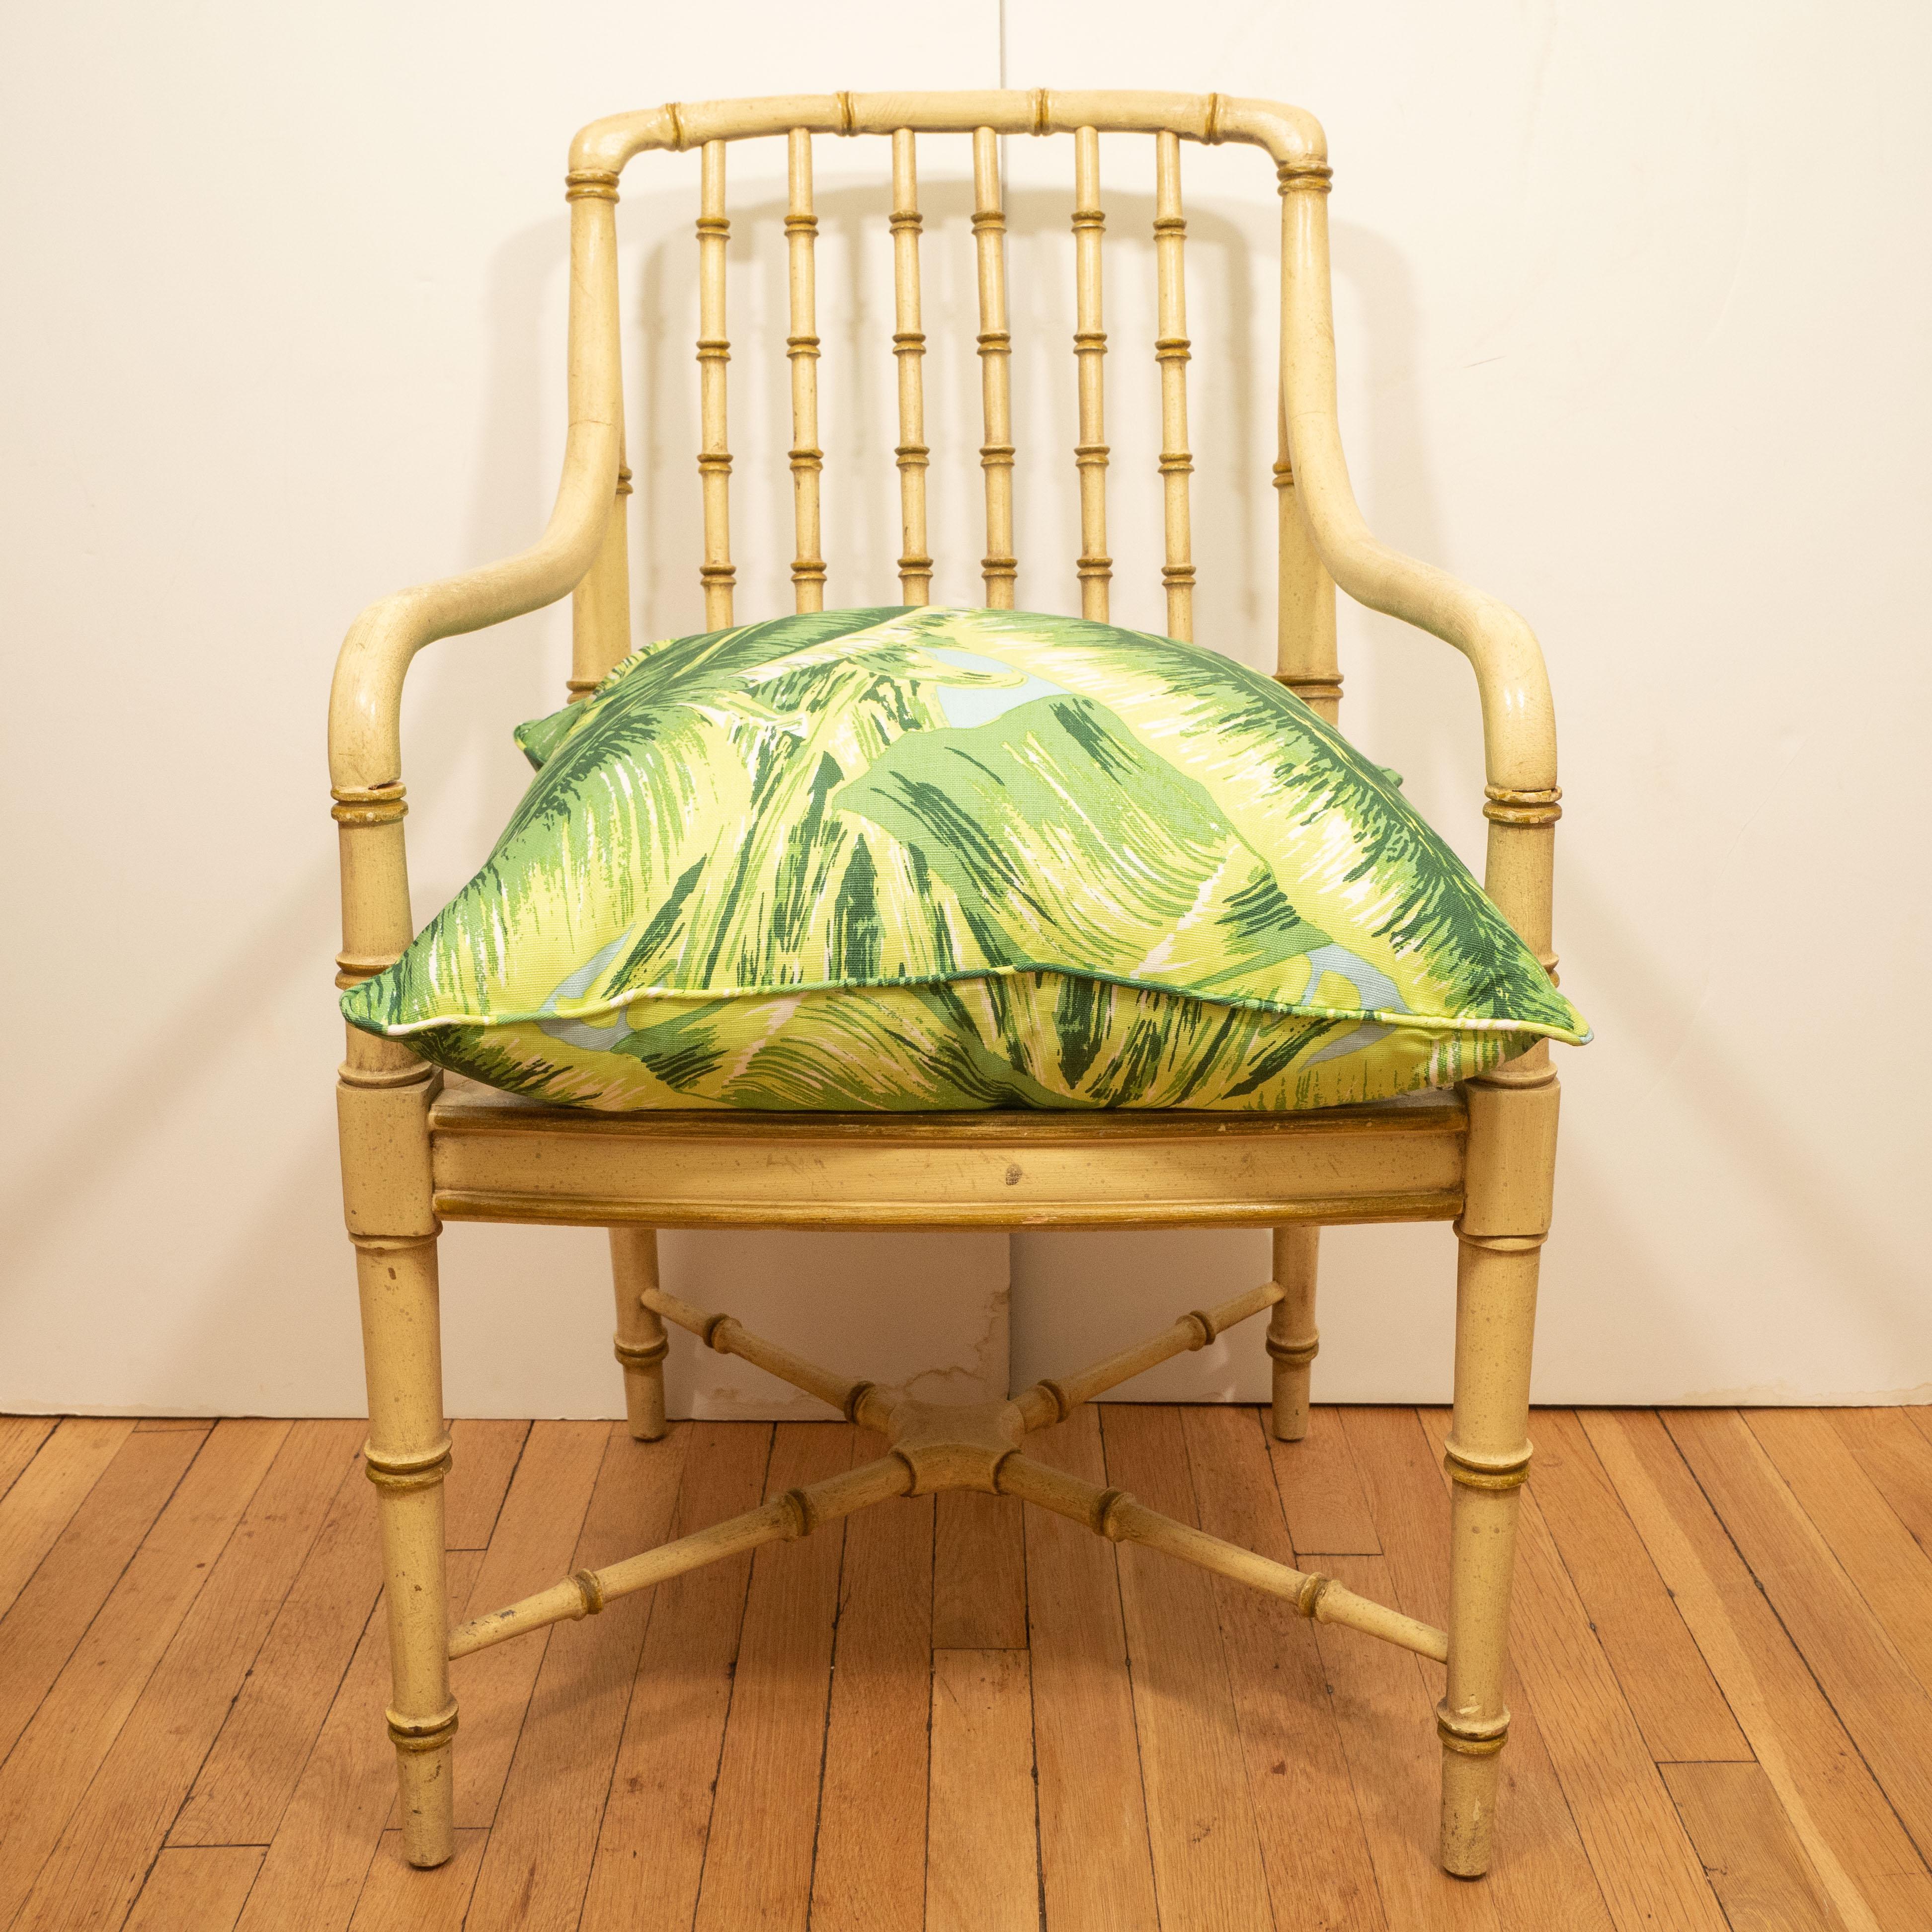 A stylish pair of vintage faux bamboo arms chairs by Bernhardt painted in a green/yellow with nice detailing on sides, back and cross stretcher. We have displayed them in our shop with a colorful cushion (not included but available for purchase).